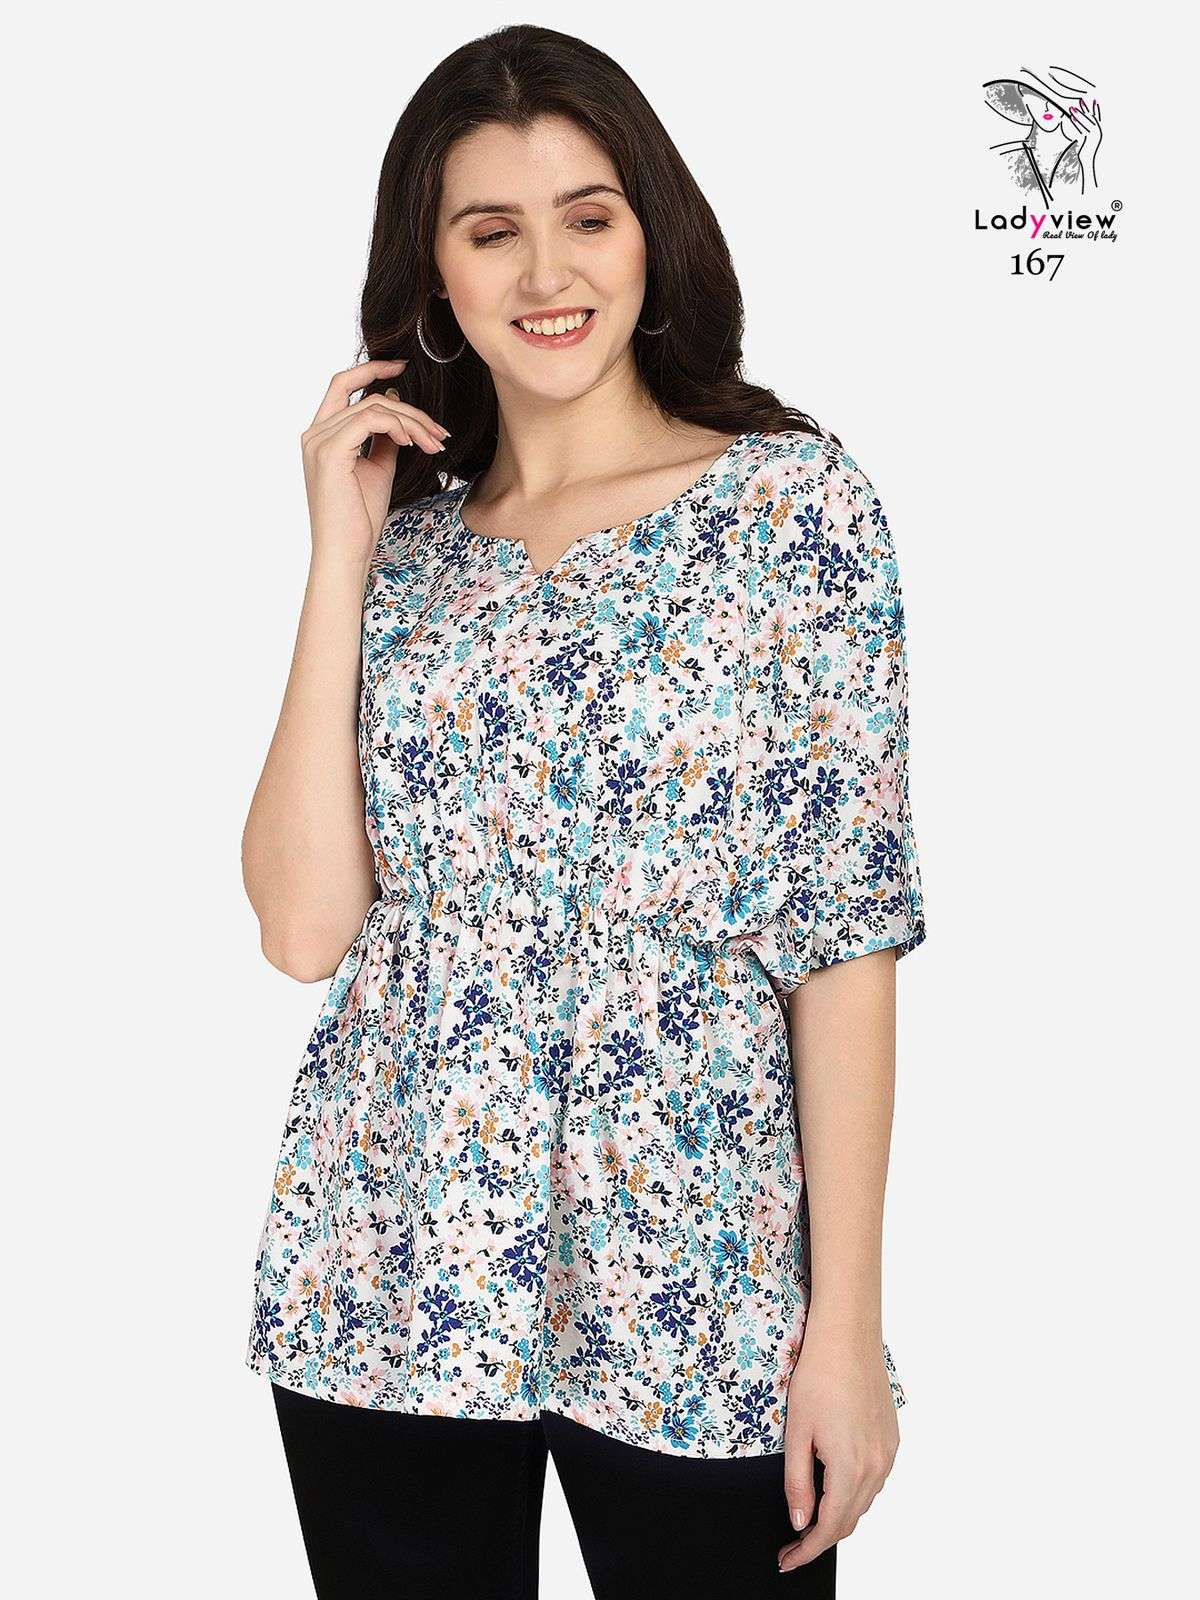 GUZARISH BY LADY VIEW 162 TO 171 SERIES BEAUTIFUL STYLISH FANCY COLORFUL CASUAL WEAR & ETHNIC WEAR HEAVY AMERICAN CREPE TOPS AT WHOLESALE PRICE